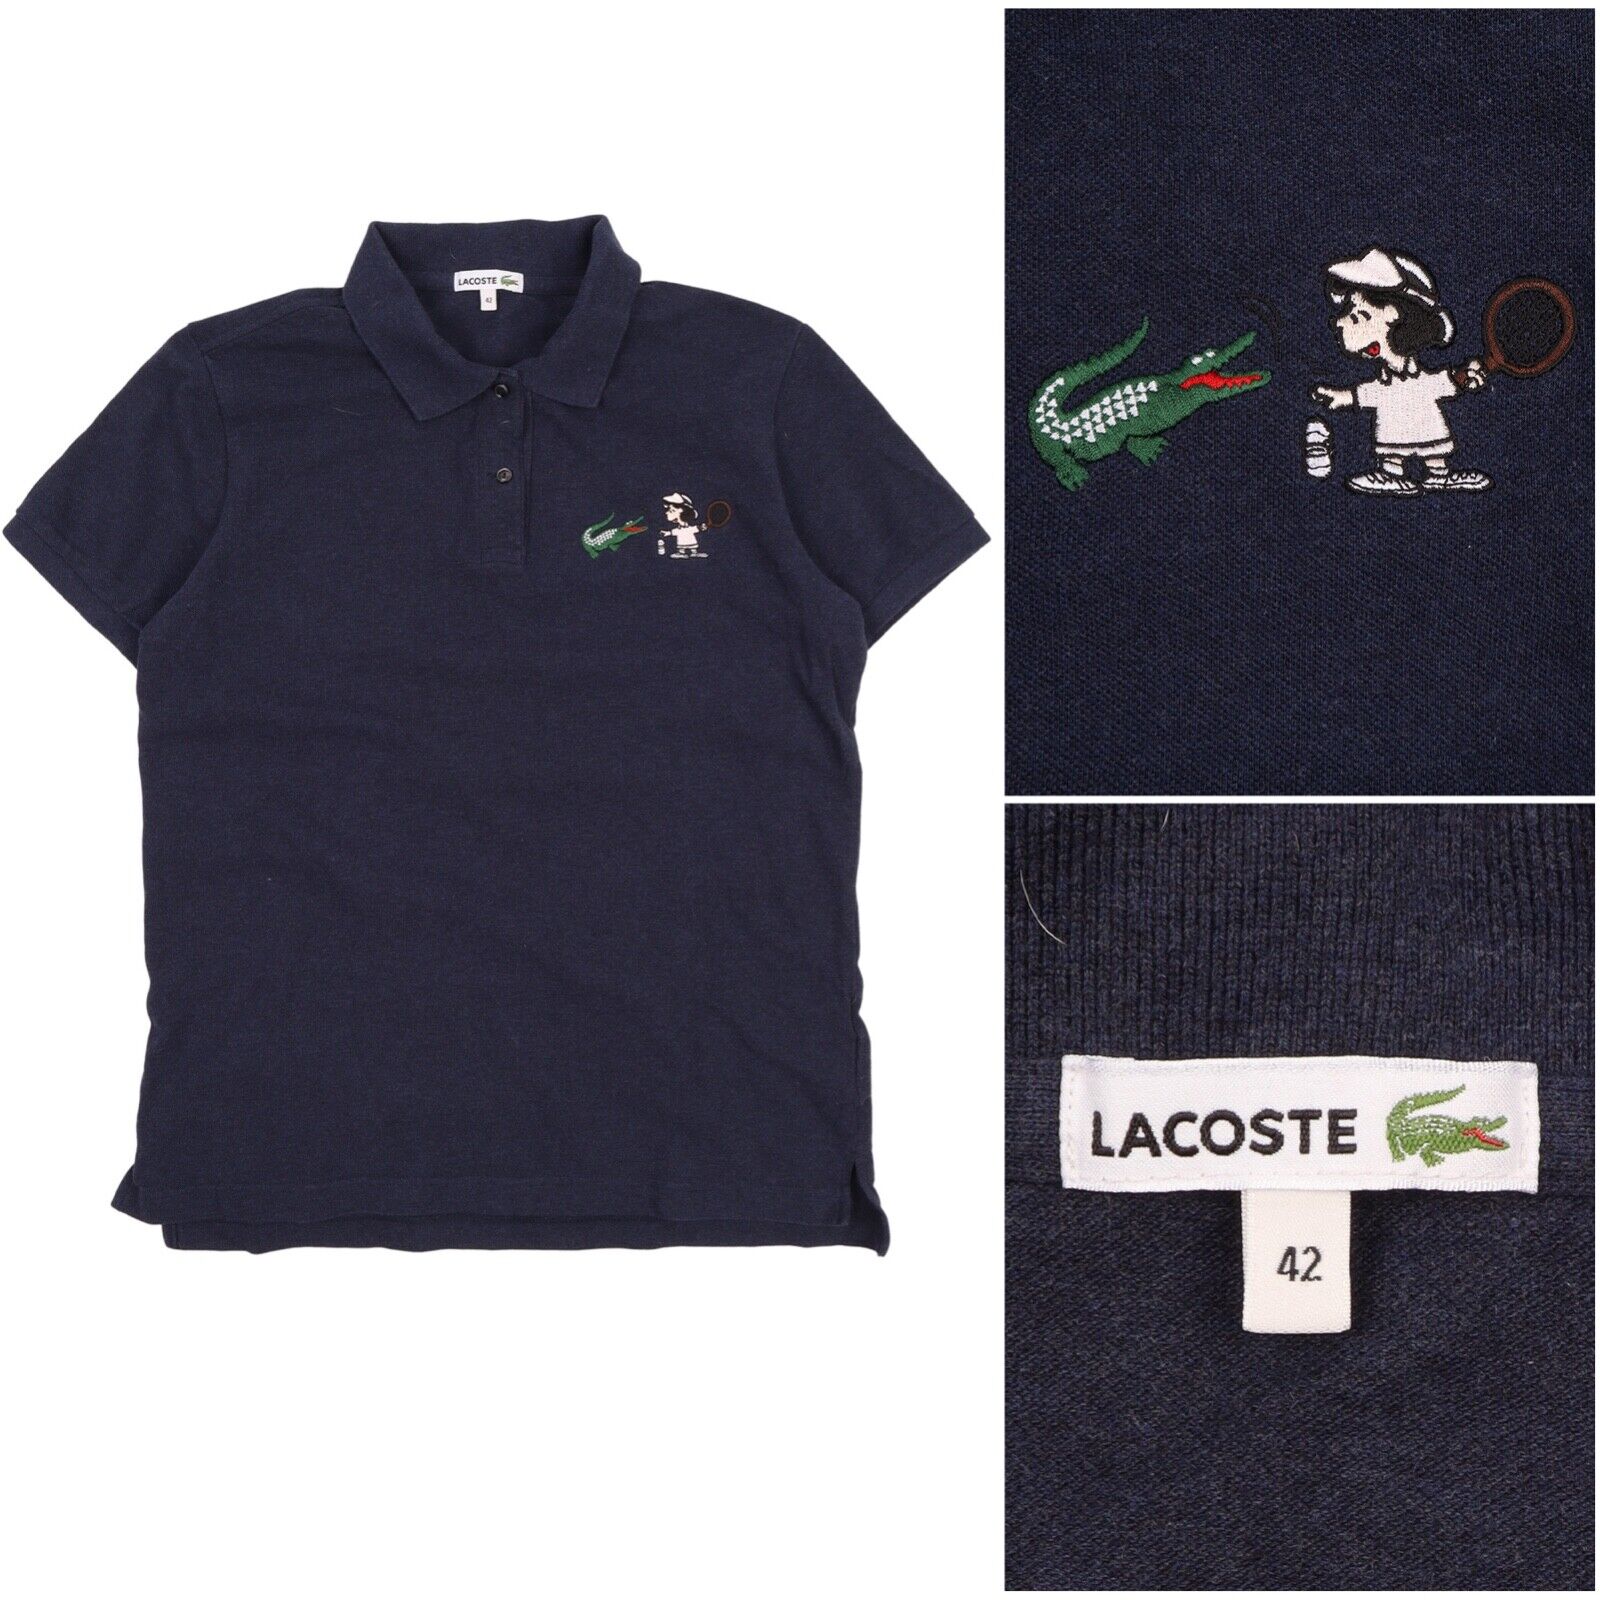 Lacoste x Peanuts Men's Blue Relaxed Fit Short Sleeve Polo Shirt